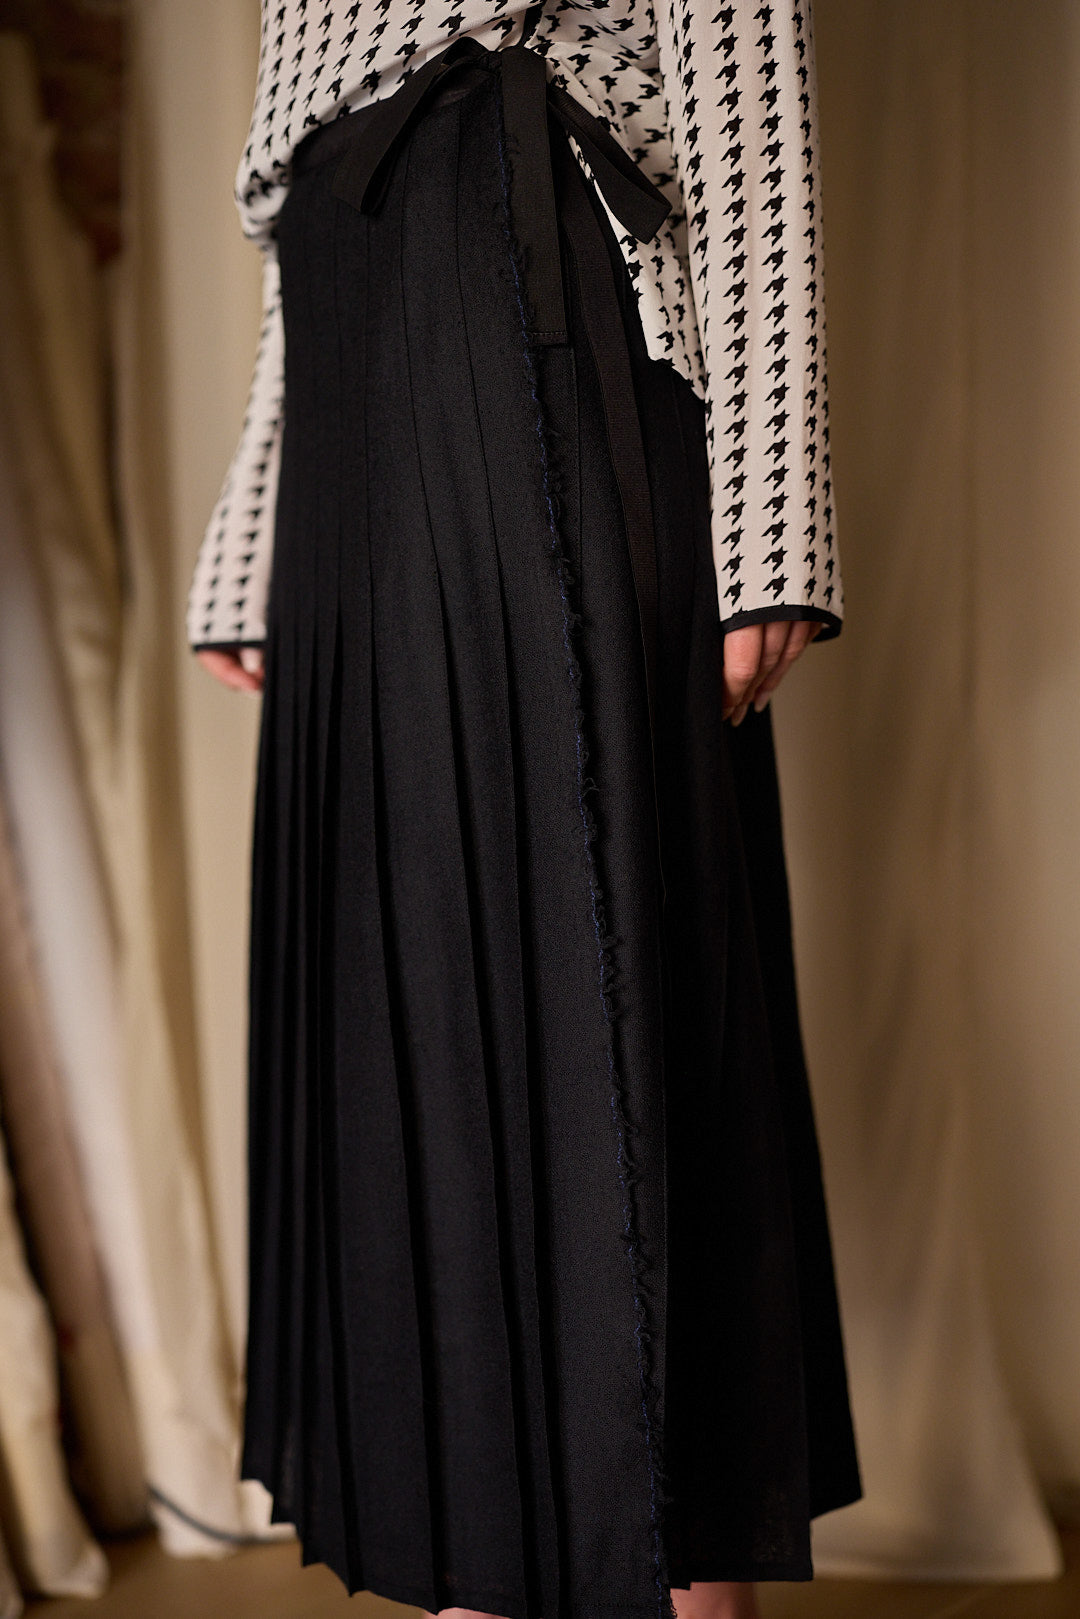 A person is wearing a black, Hand Pleated Wrap Skirt - Japanese Wool Gauze paired with a white, long-sleeved blouse featuring a black houndstooth pattern. The details and texture of the clothing, made from Japanese wool gauze, are highlighted in this side profile shot.